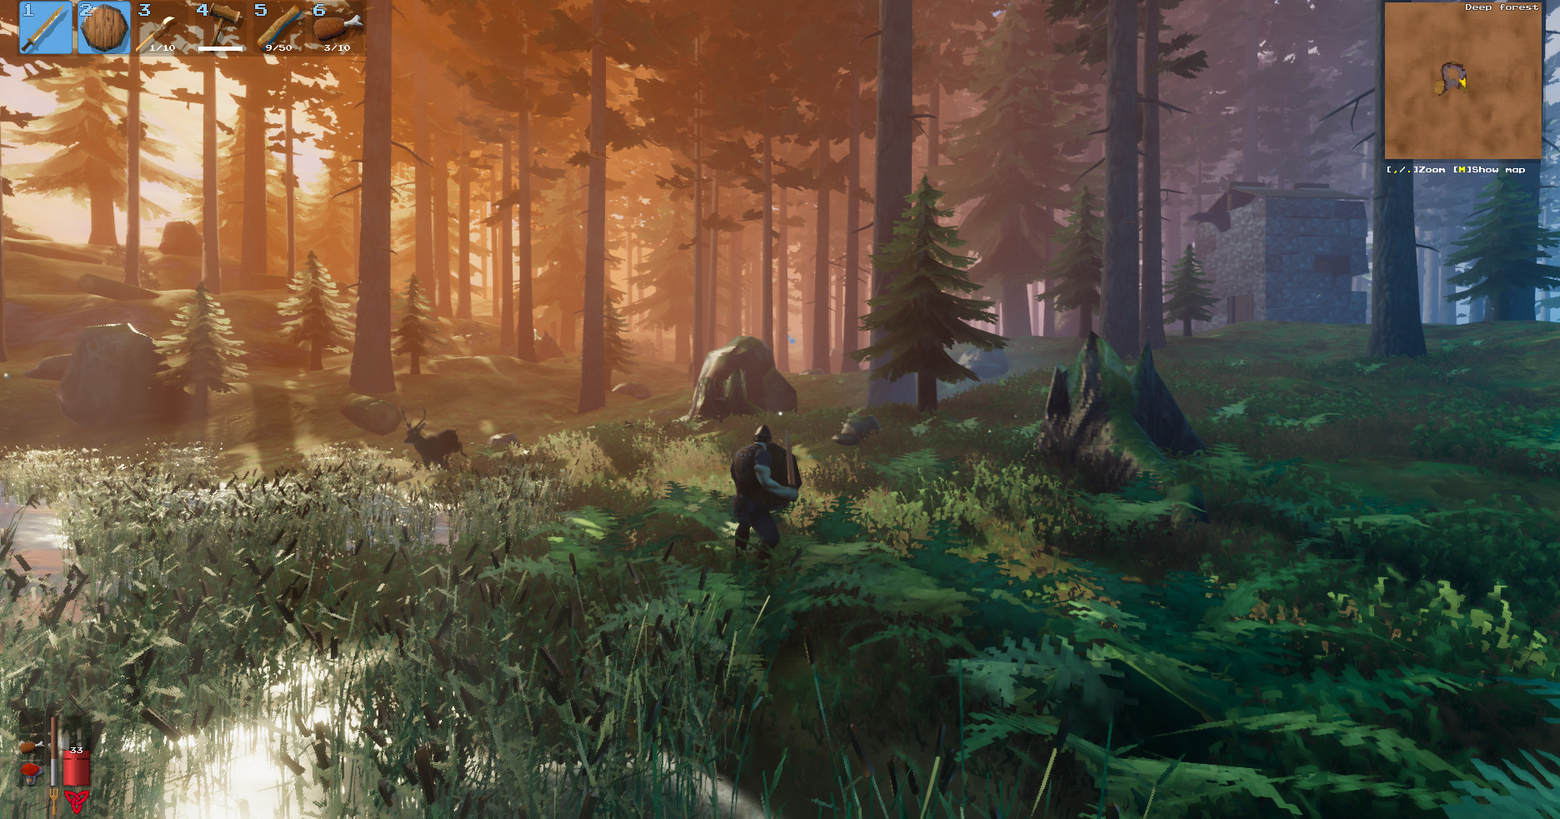 In Valheim, as a Viking, you'll erect impressive buildings and fight against mystical enemies. Roam through impressive forests, as seen here in this screenshot: The camera looks into a slightly hilly coniferous forest landscape with lots of green plants. From the left, the sun shines light into the slightly foggy forest, which is thus bathed in a color gradient from orange to blue. The game is one of the best sandbox games and can be played on the PC via Steam.